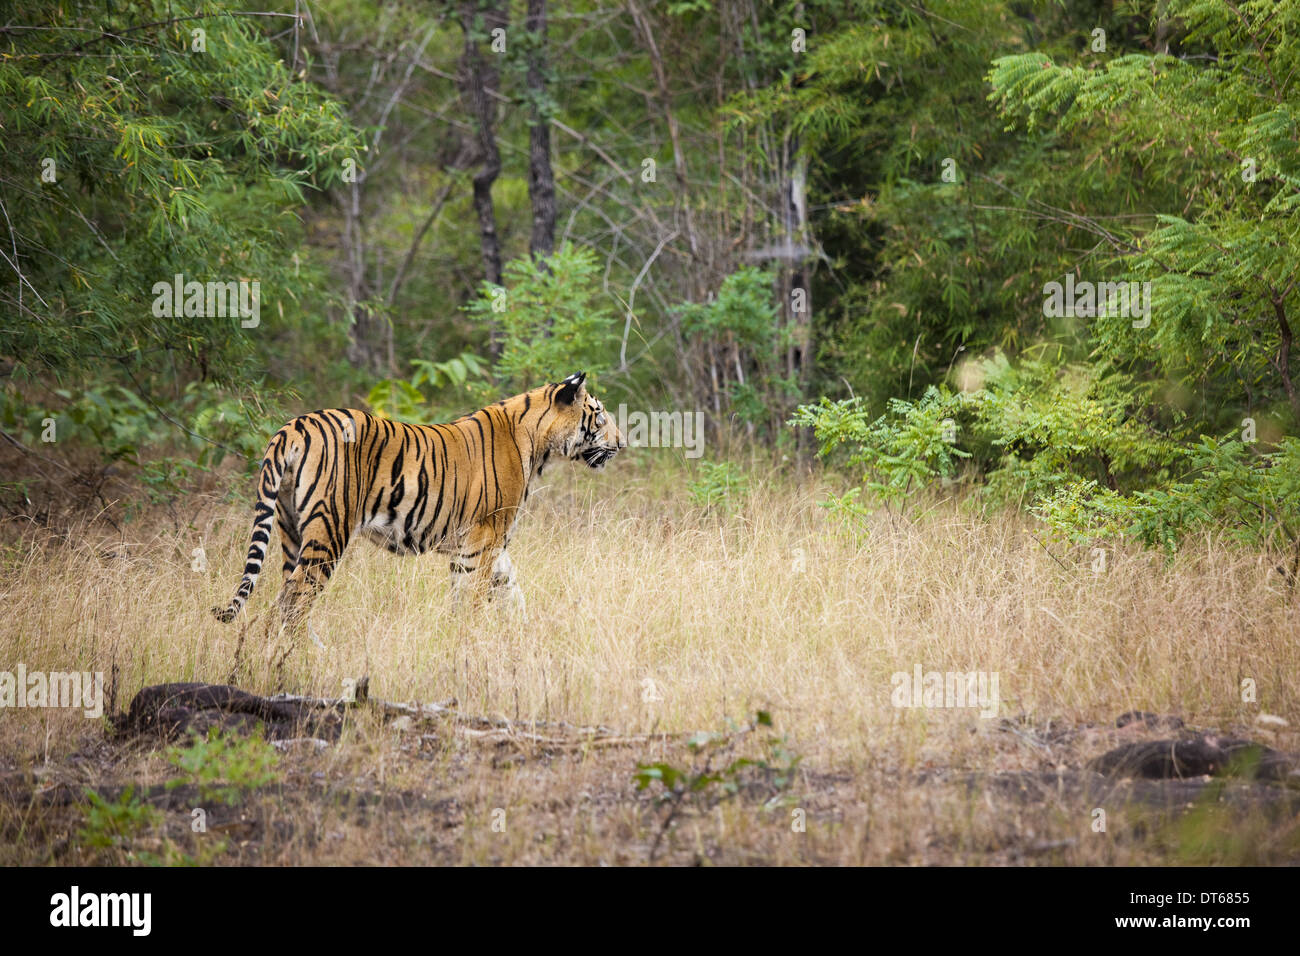 An adult tiger in Bandhavgarh National Park, India Stock Photo